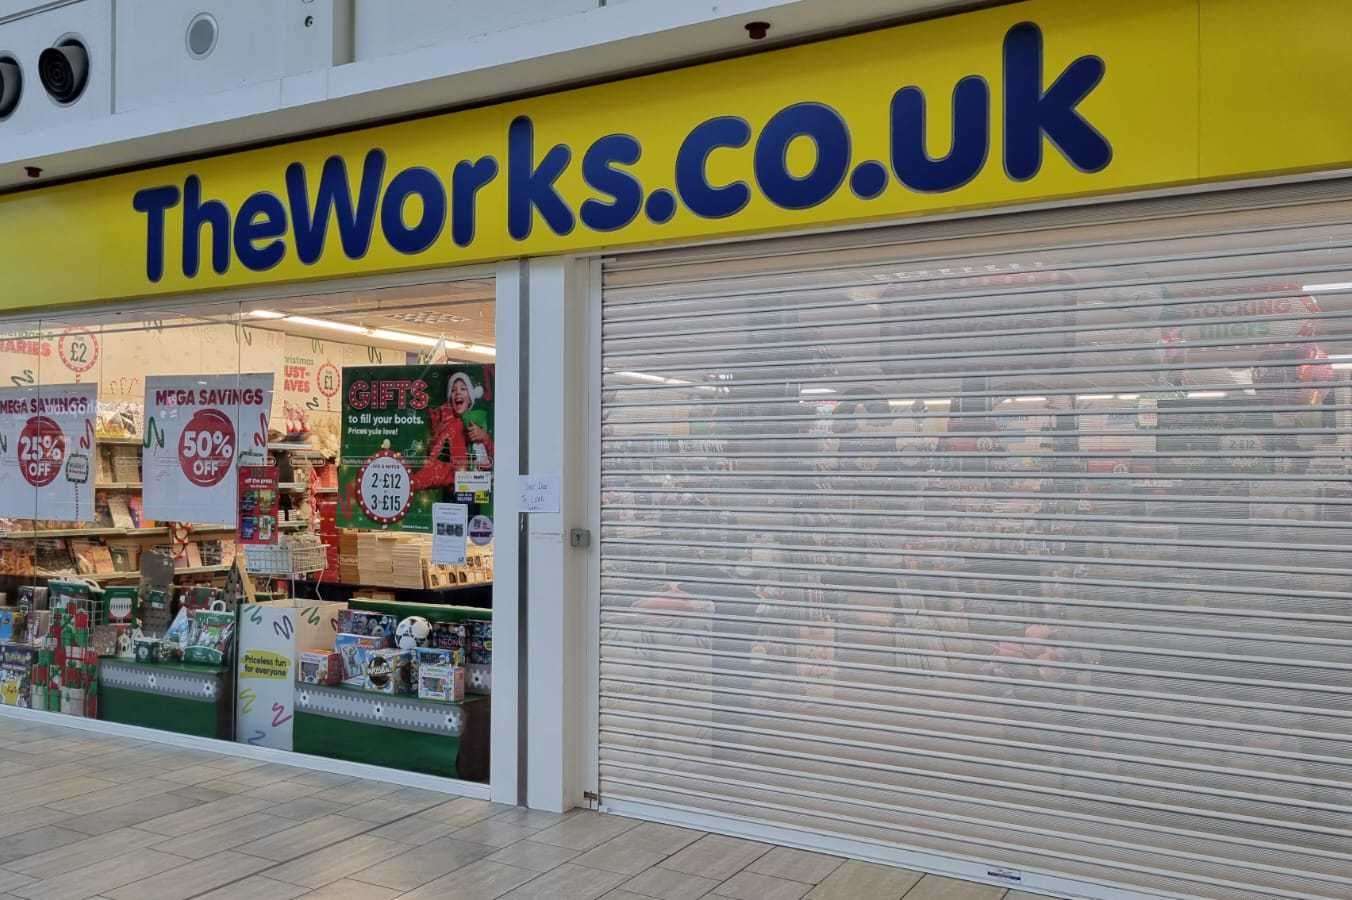 The Works in County Square, Ashford has closed due to a leak